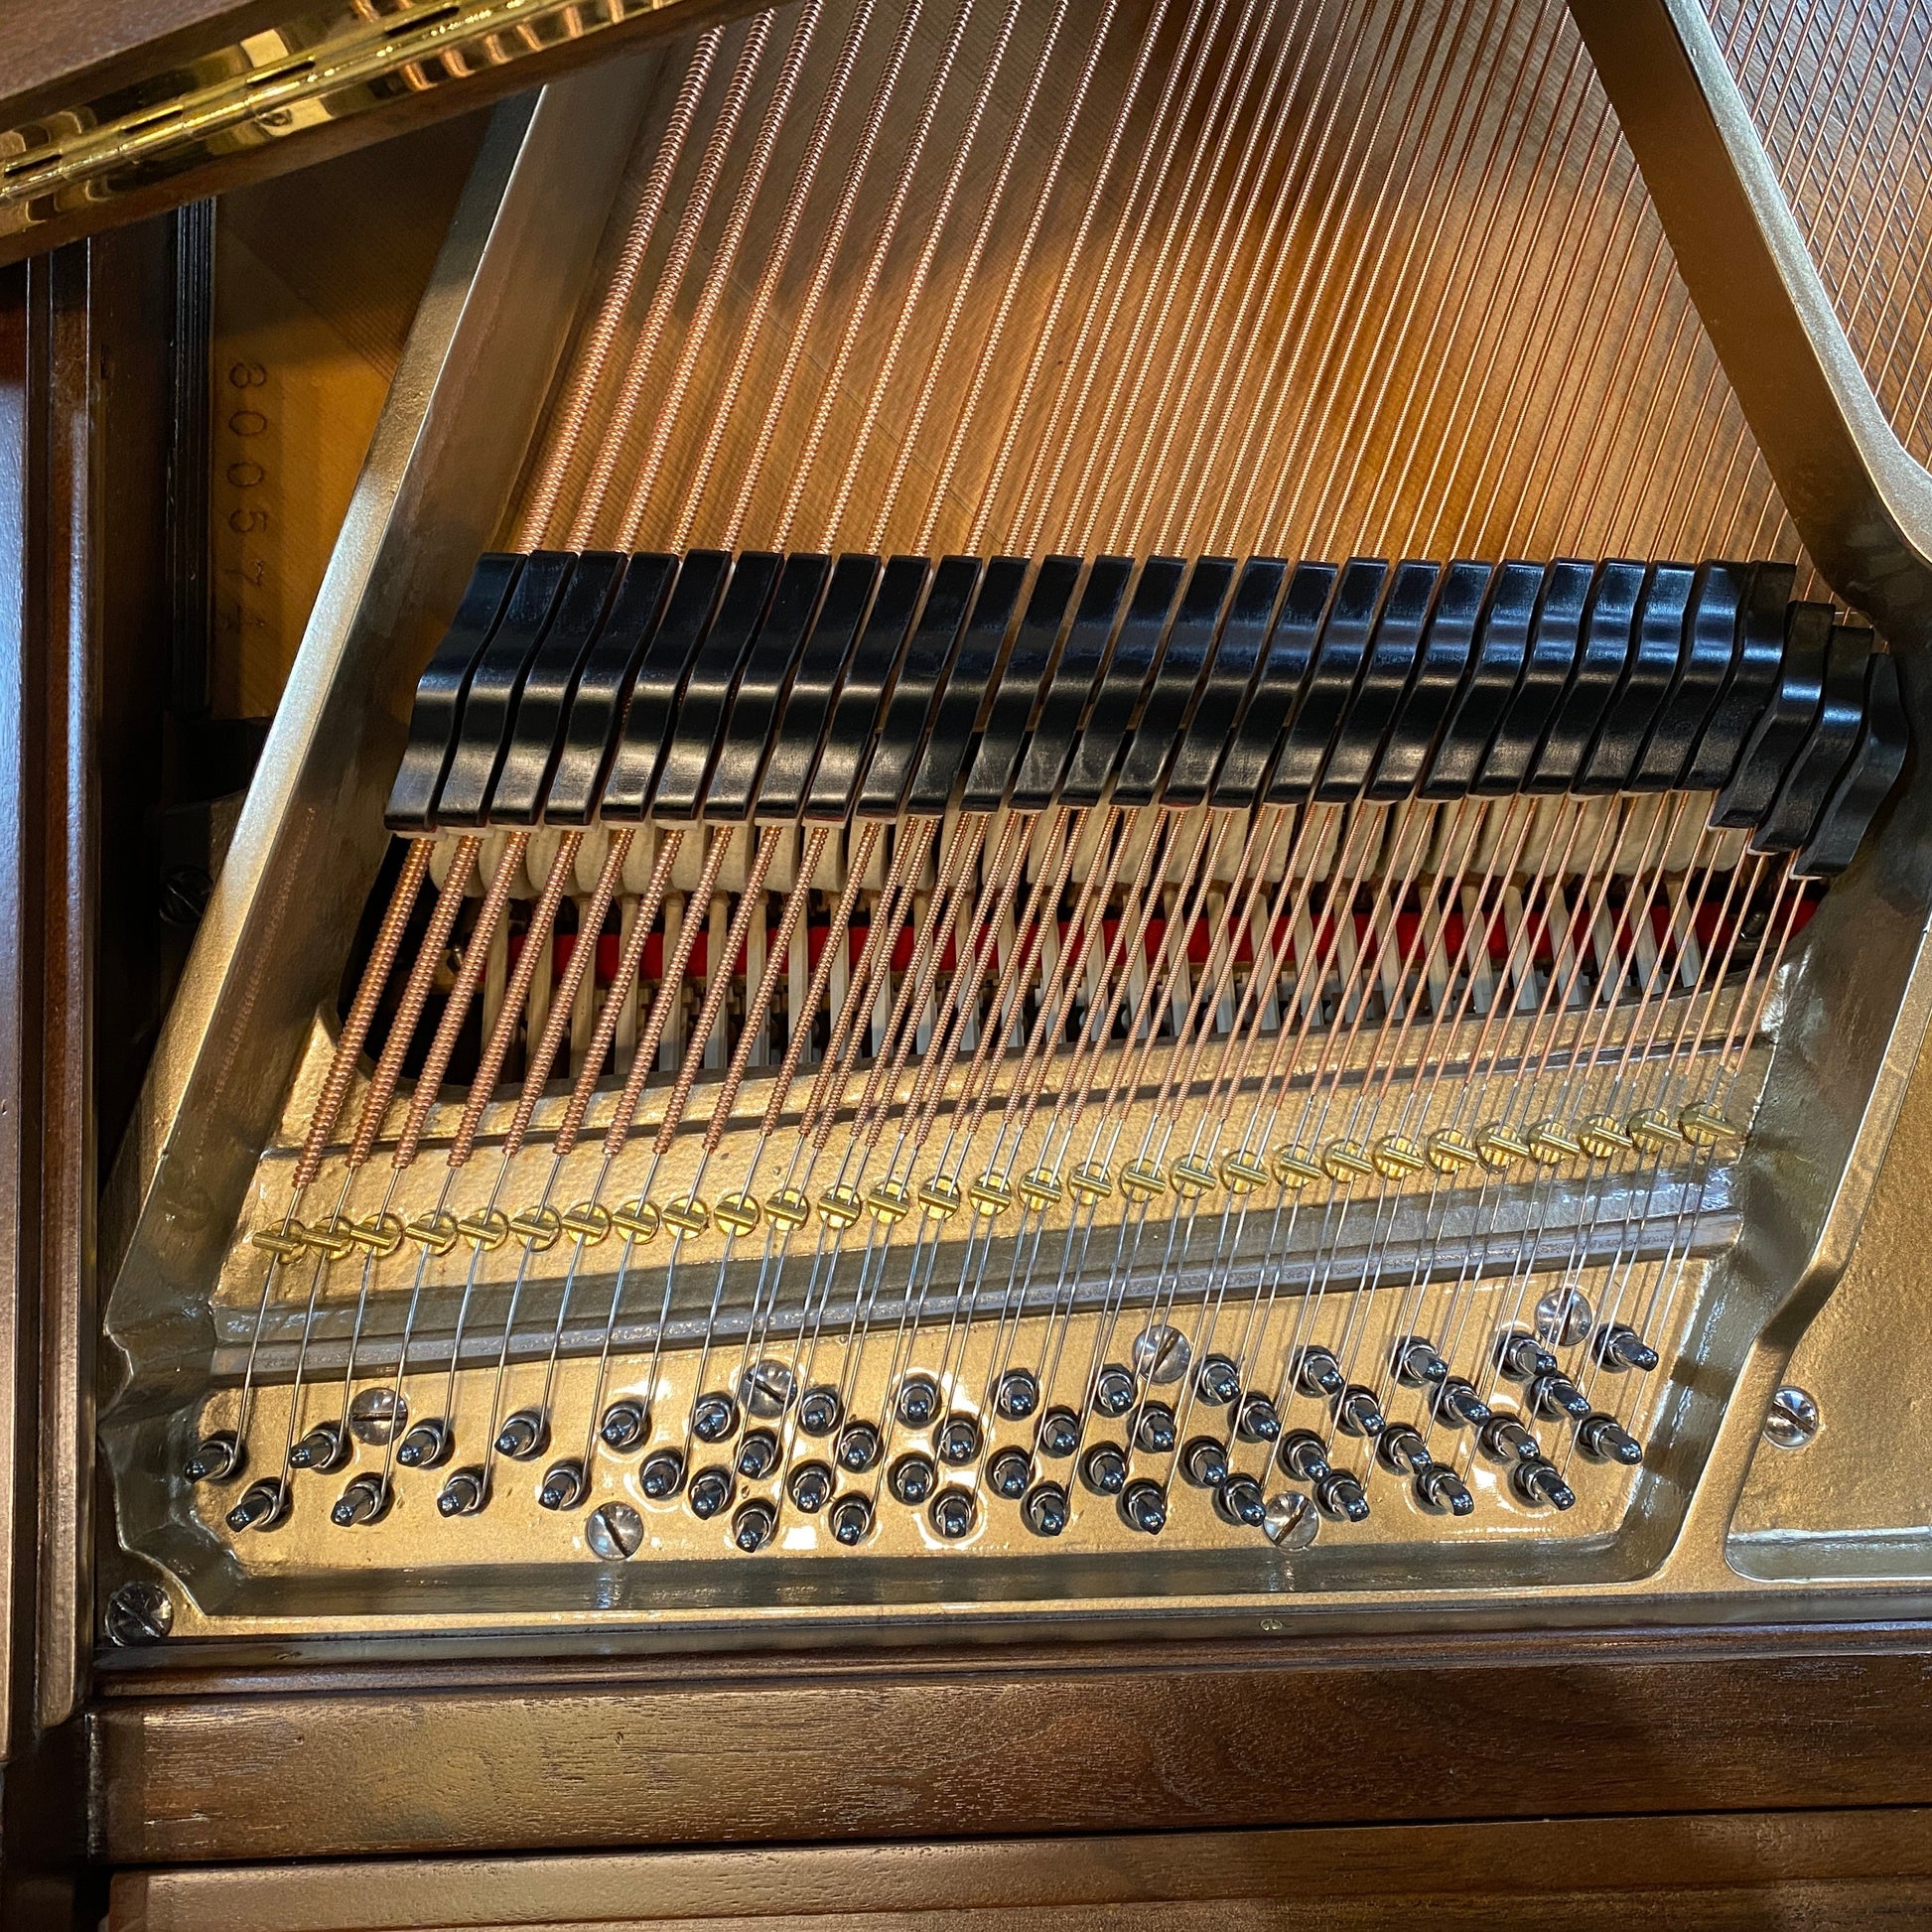 Image 13 of Vintage Family Heirloom Baby Grand Piano - Commissioned for Restoration & Refinishing!